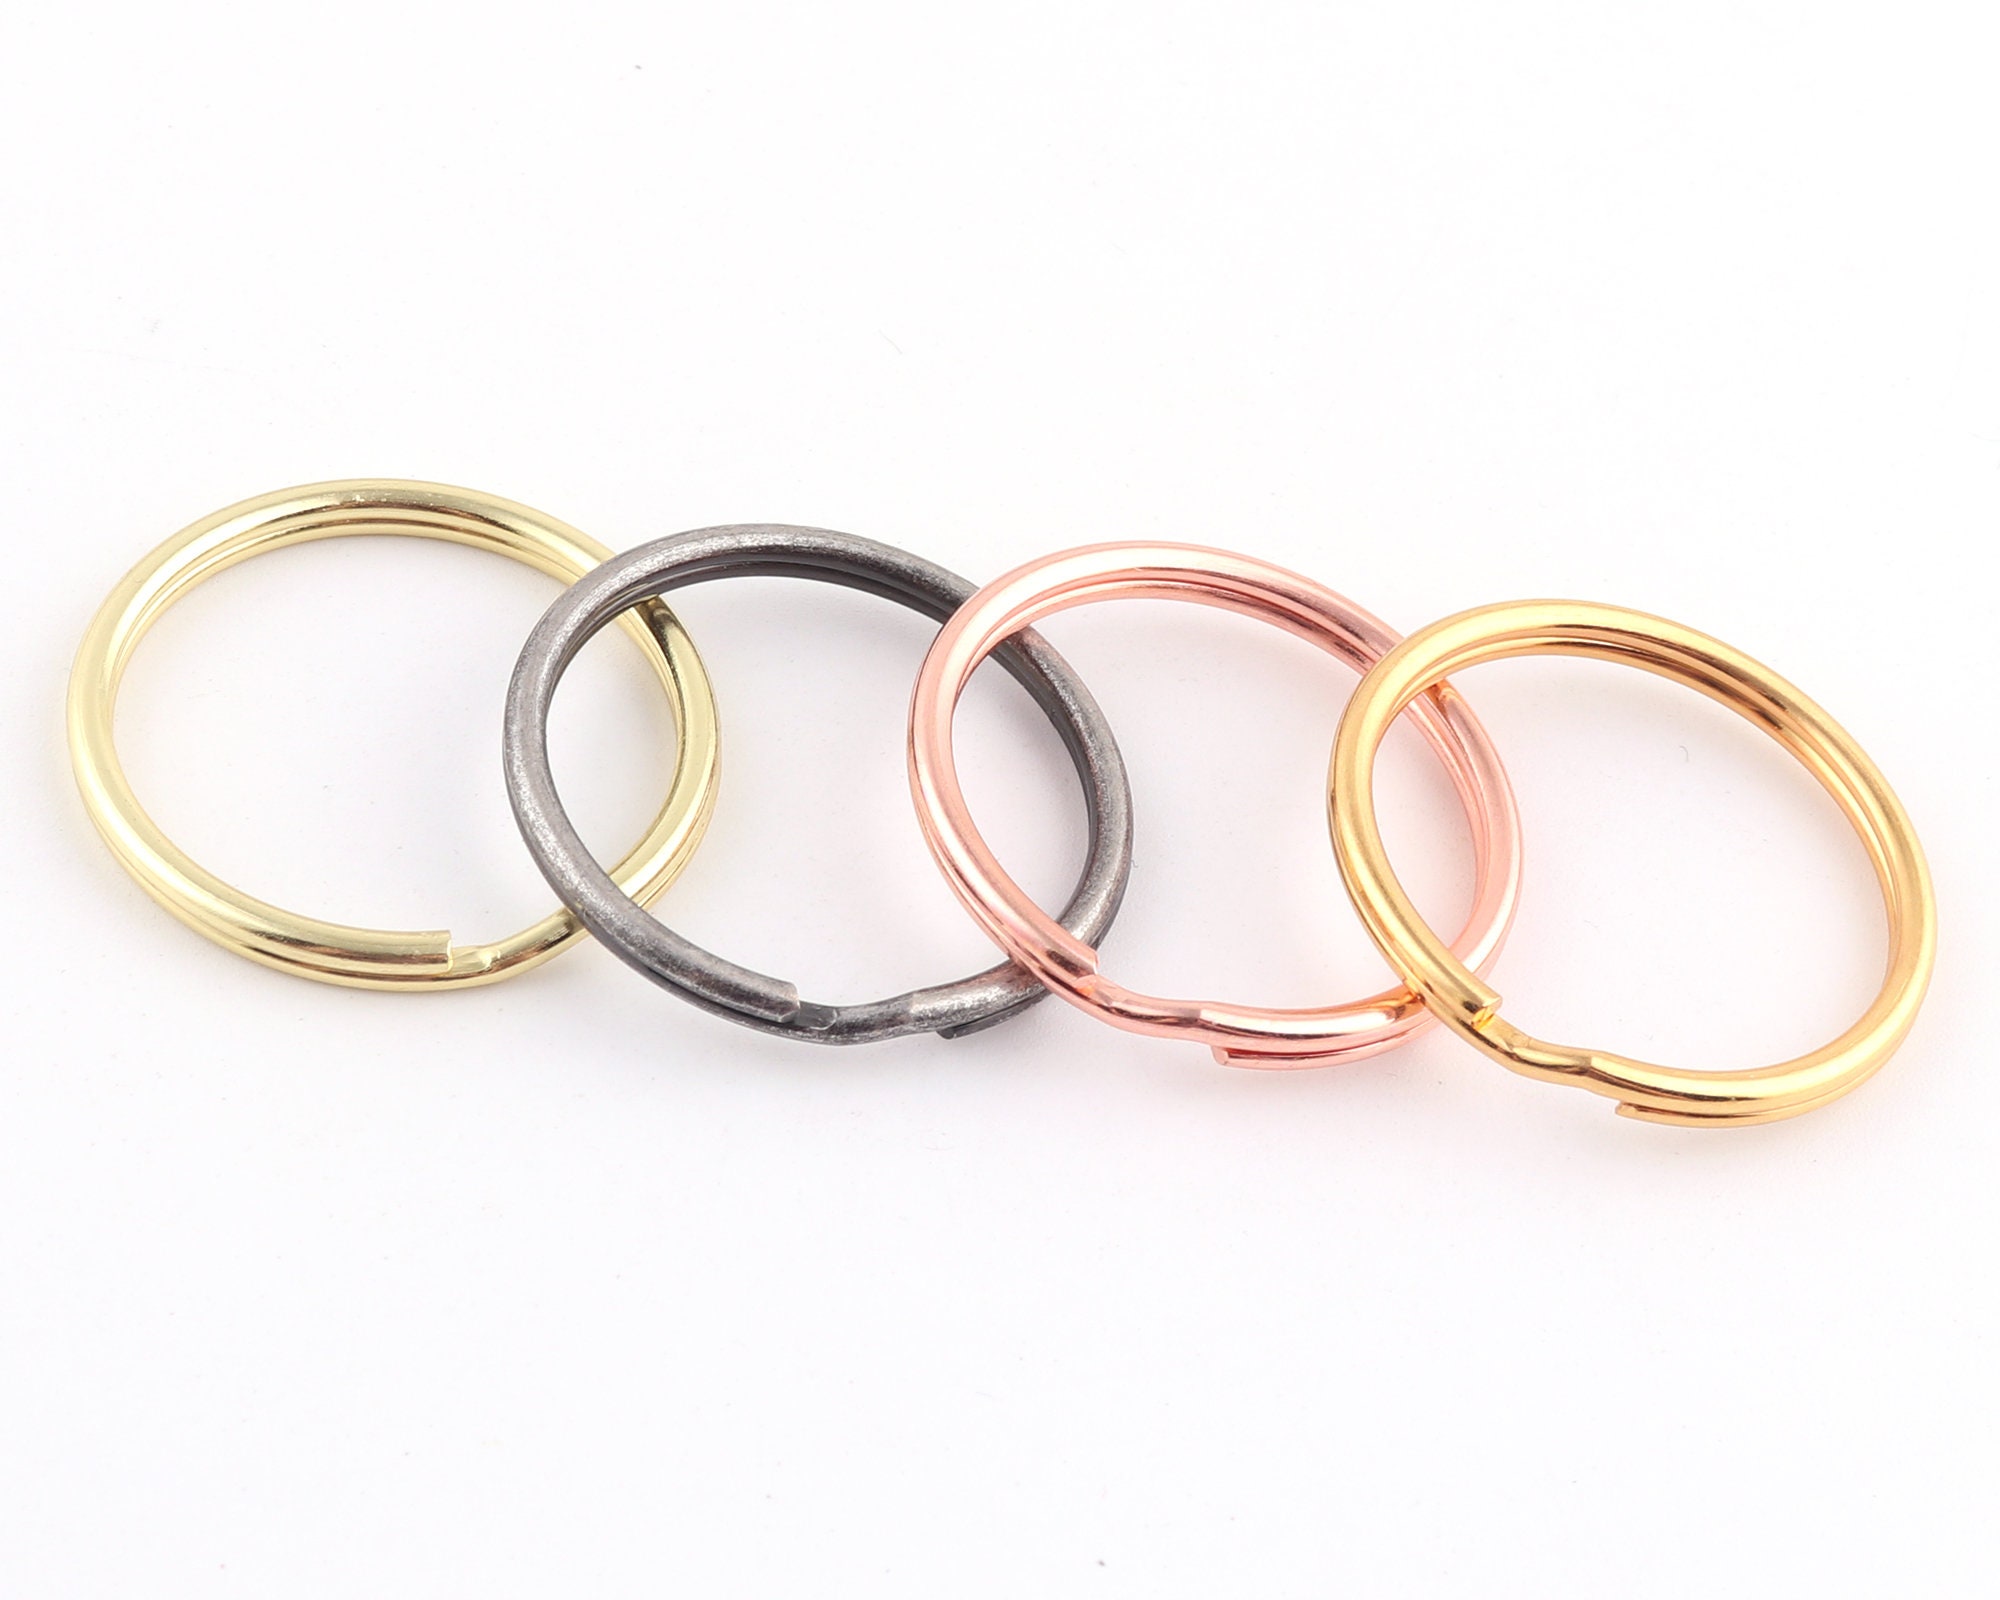 100 Sets Keychain Rings for Crafts, Round Split Key Rings, Metal Keychain  Connector with Snap Tabs